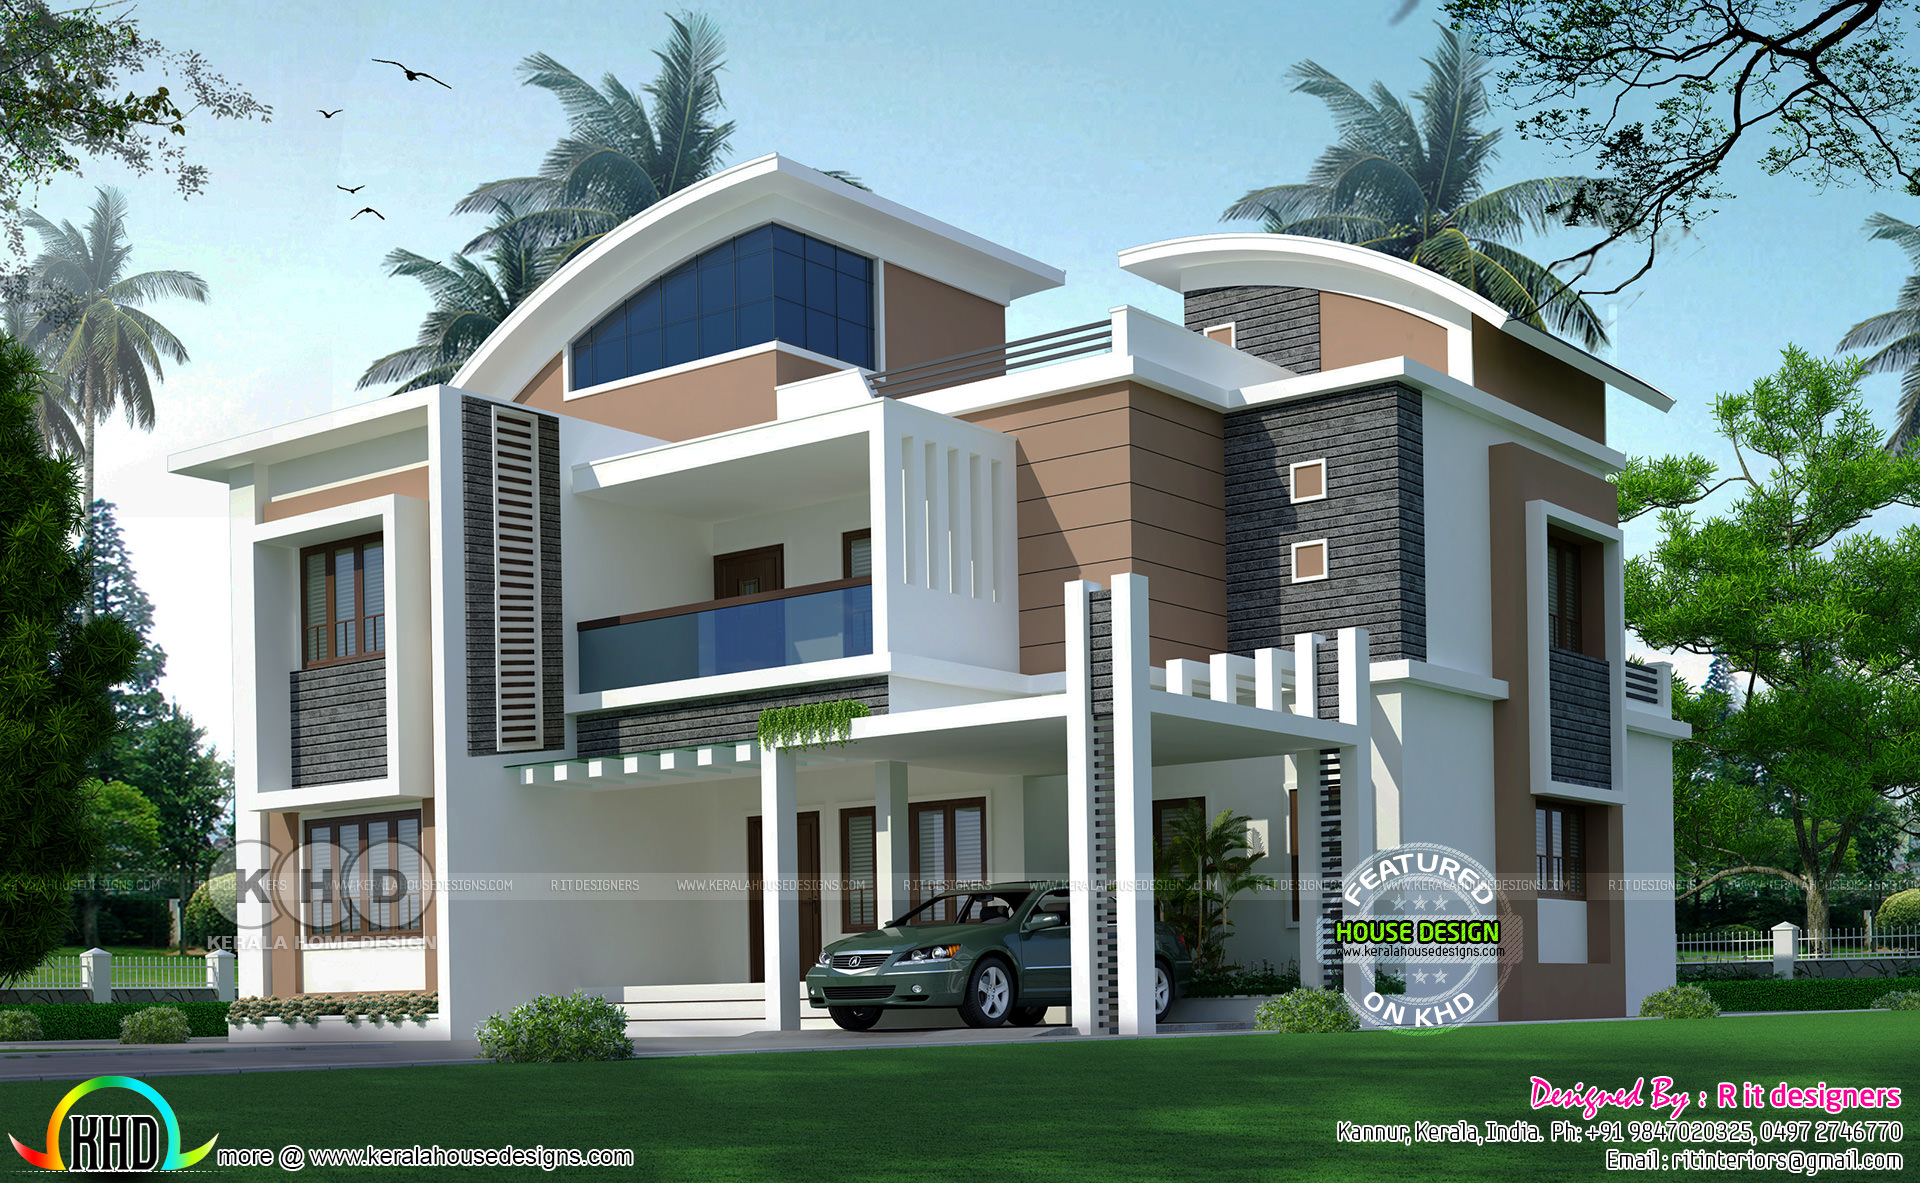  5  bedroom  3212 sq ft house  architecture Kerala home  